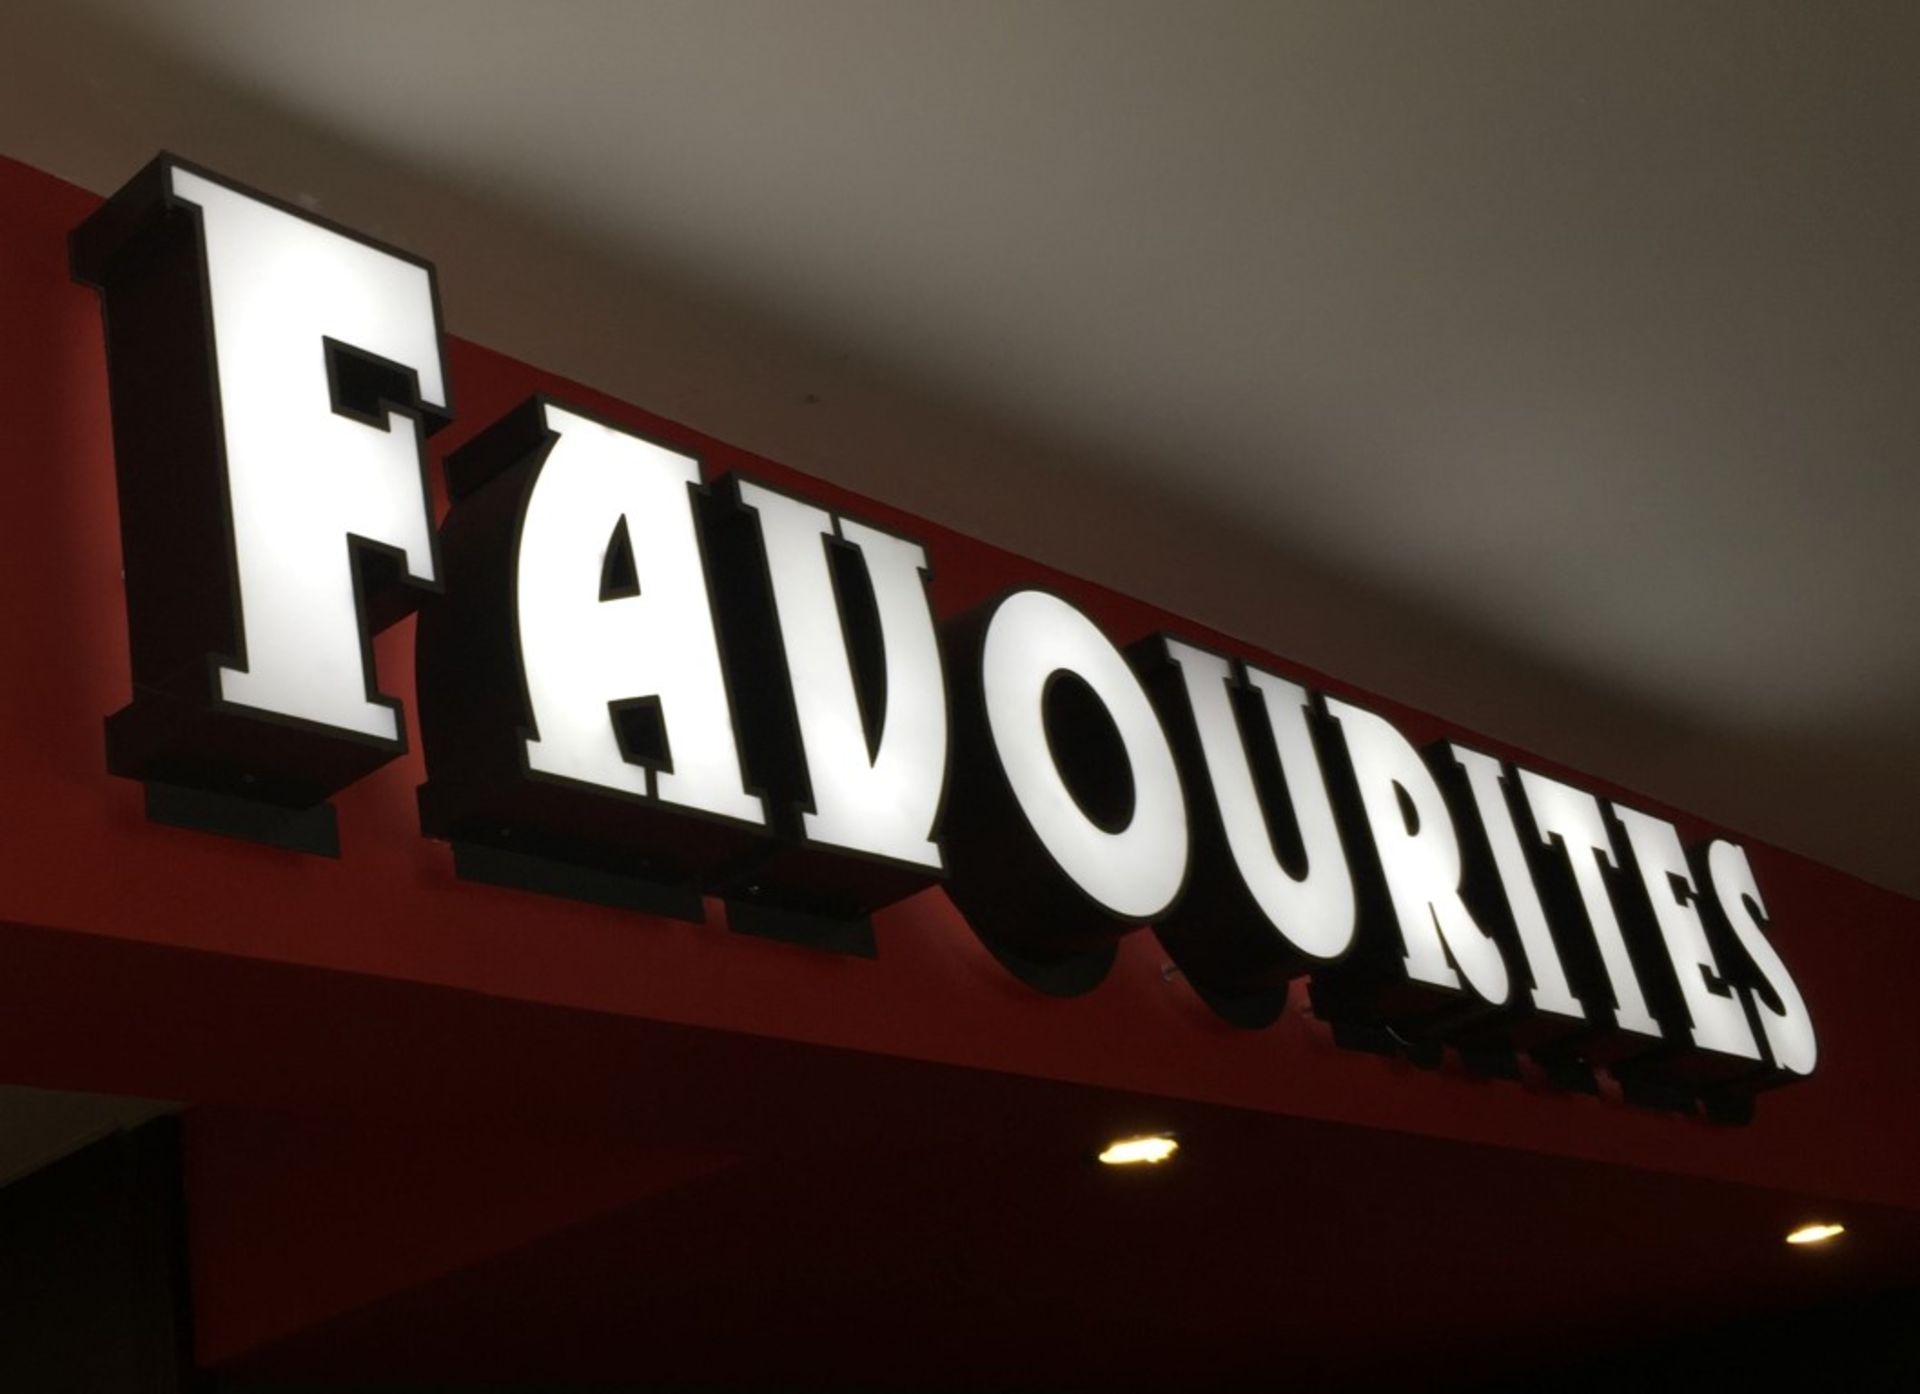 FAMILY FAVOURITES Illuminated SIGNAGE Individual Letters Measuring 9ft in Width - Approx Letter - Image 3 of 3